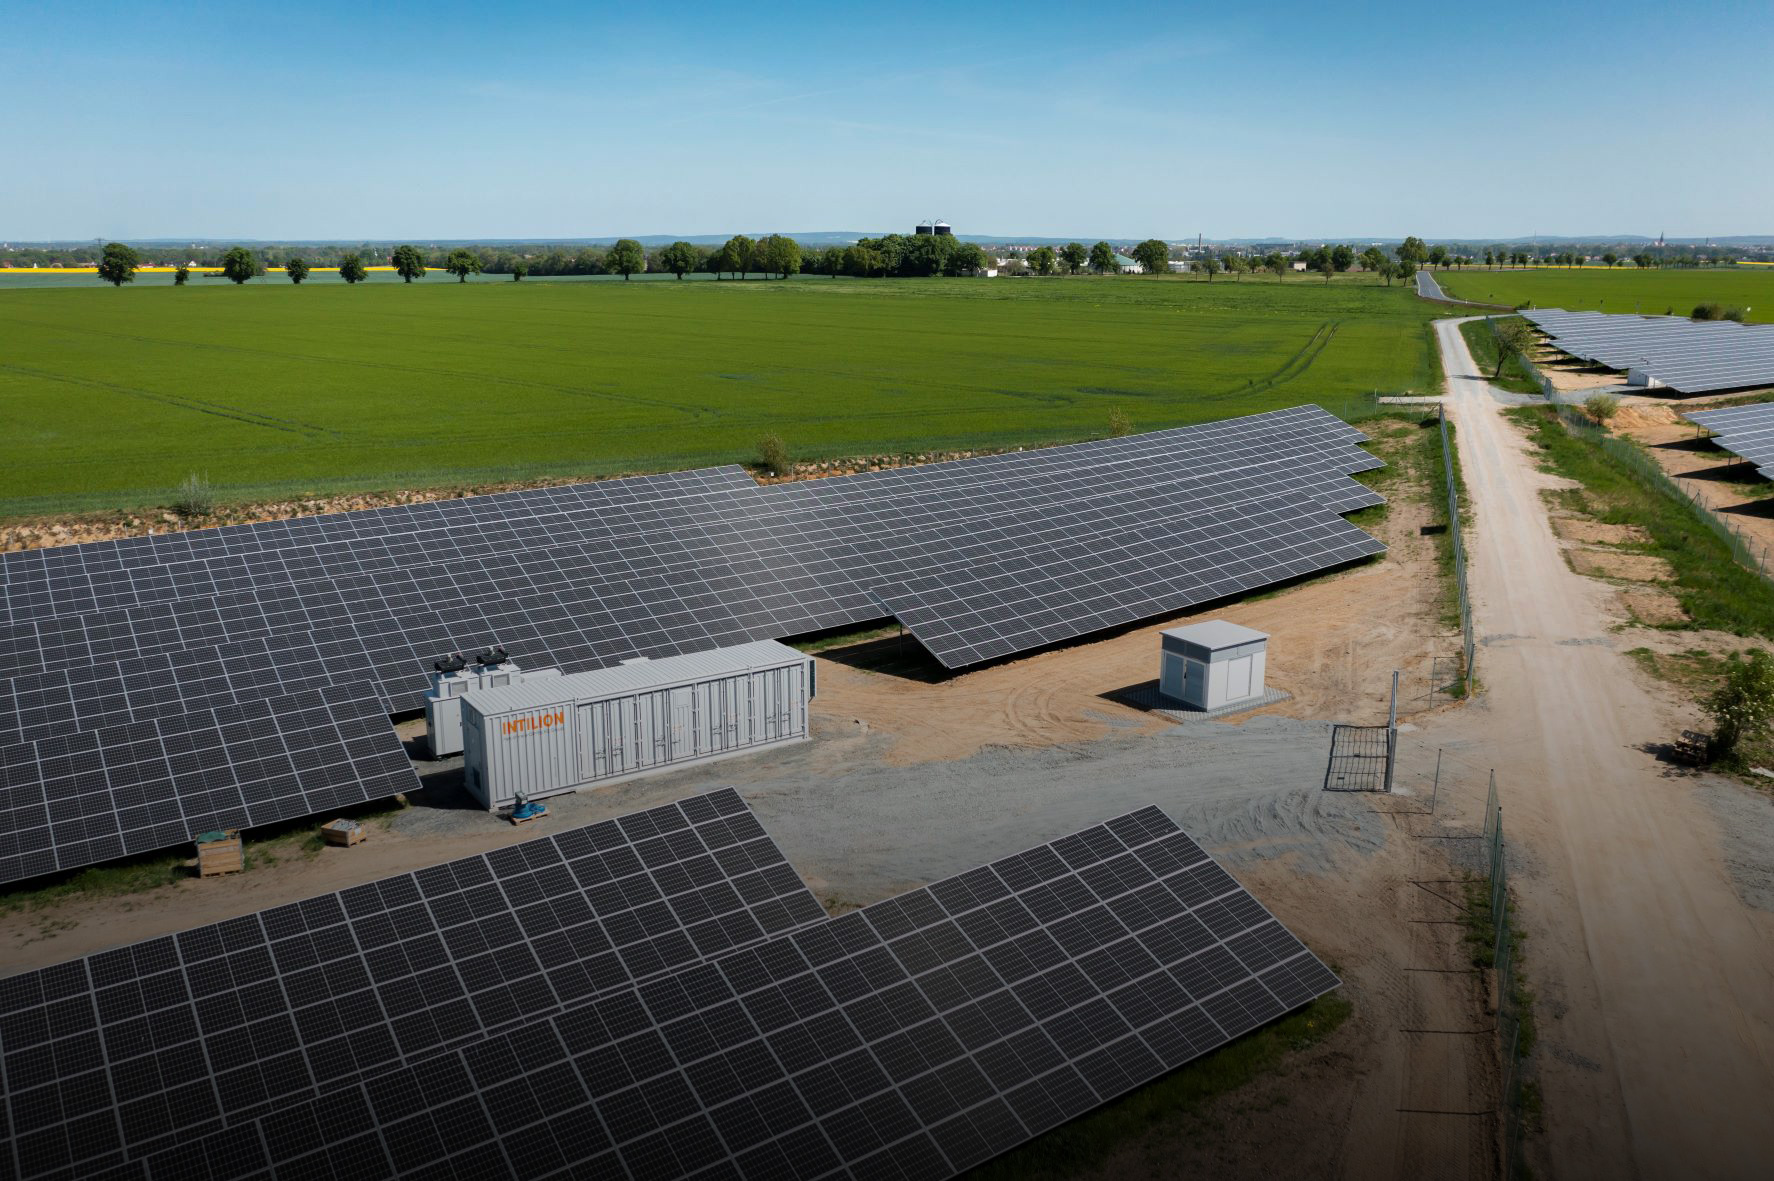 Photo of Qair's first battery storage and solar power plant in Priestwitz, Germany.